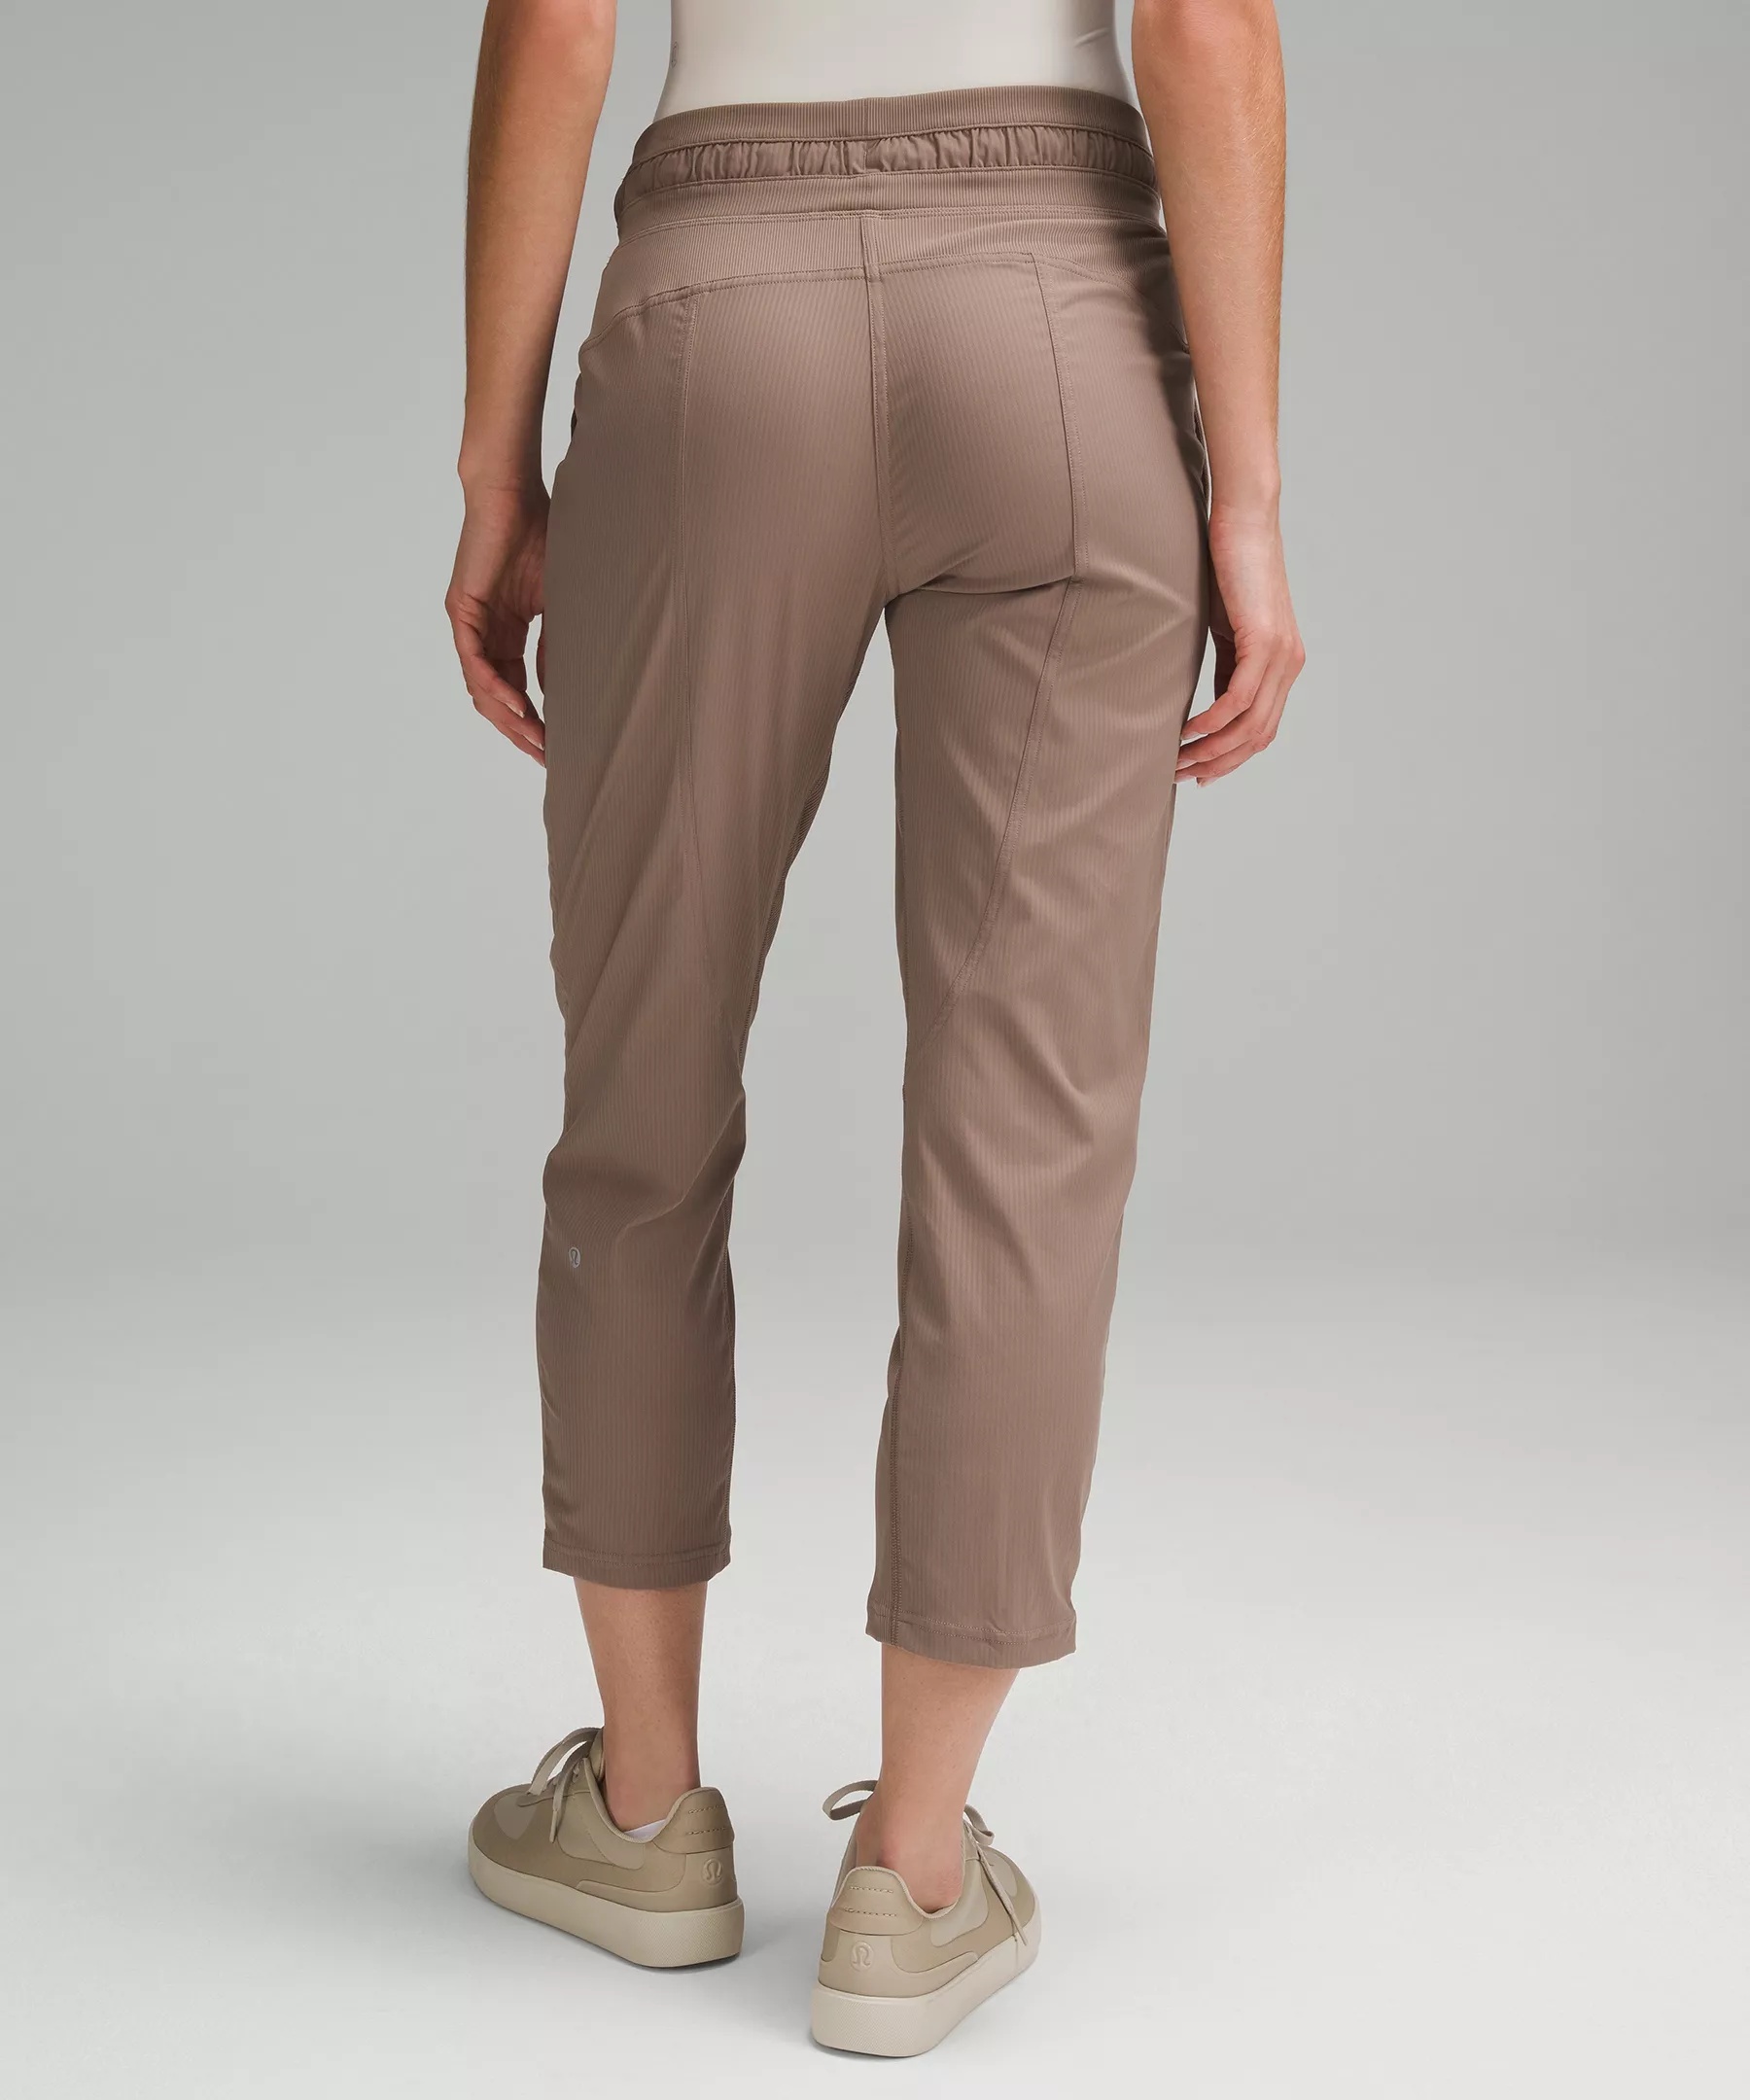 Dance Studio Mid-Rise Cropped Pant - 3